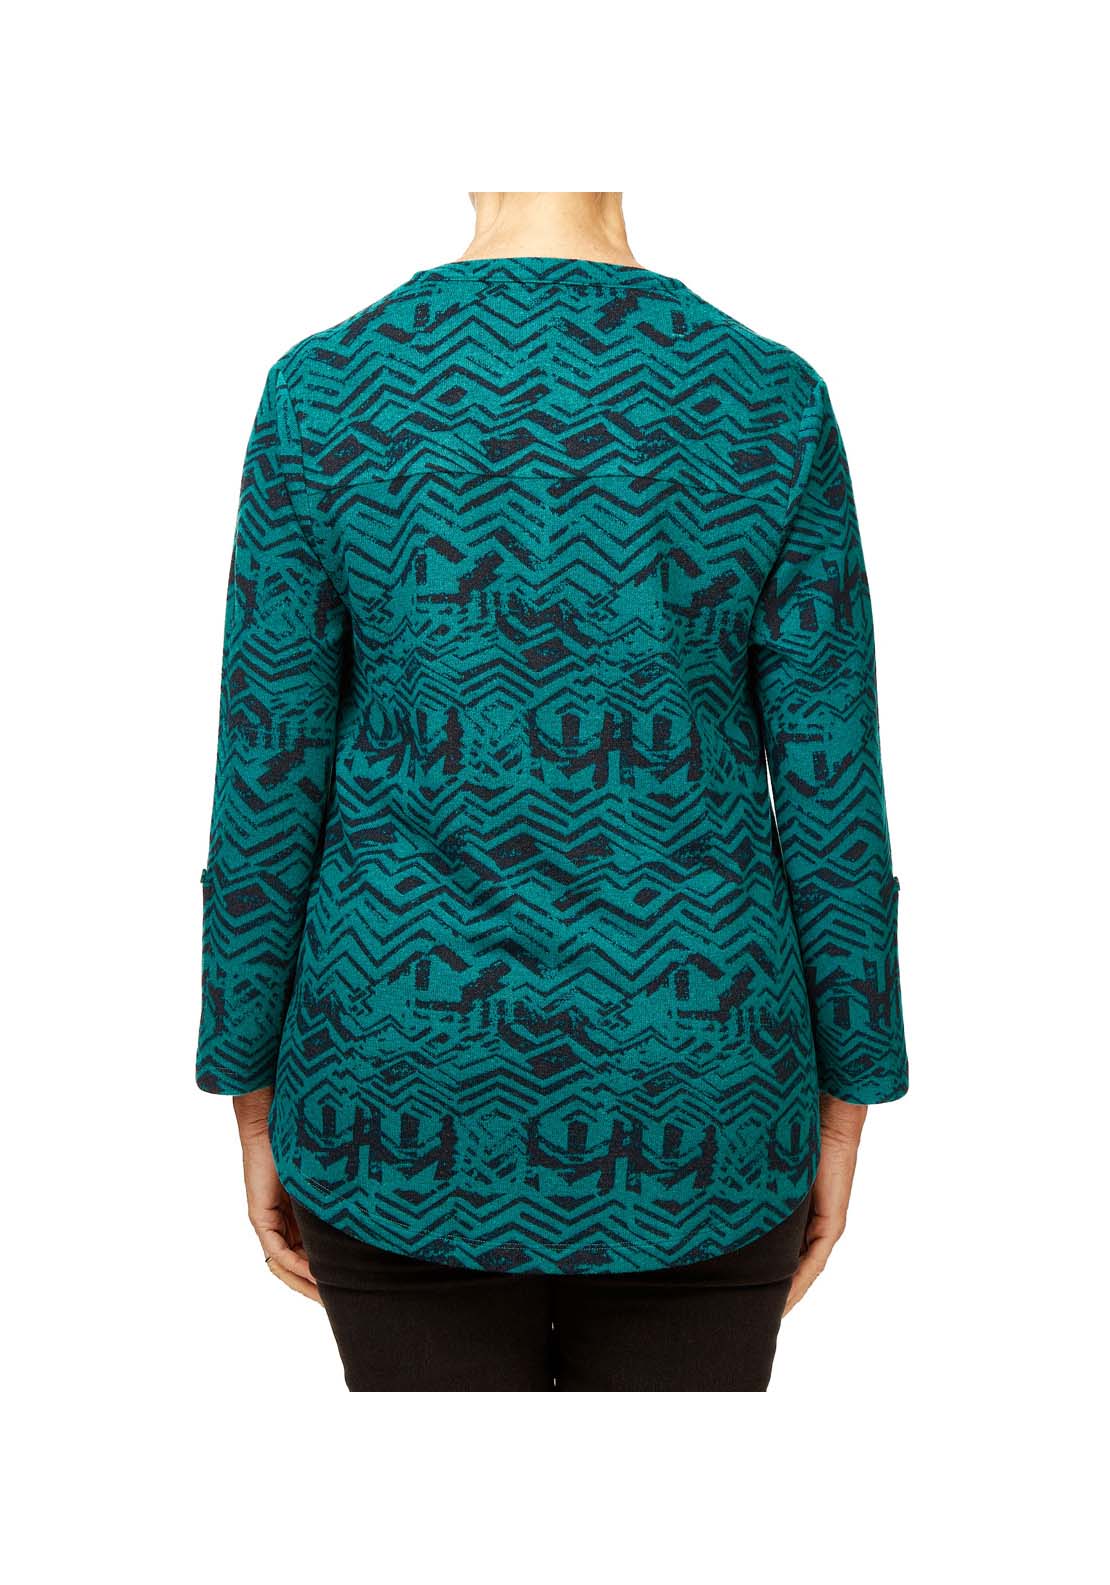 Tigiwear Azure Abstract Print Top 4 Shaws Department Stores